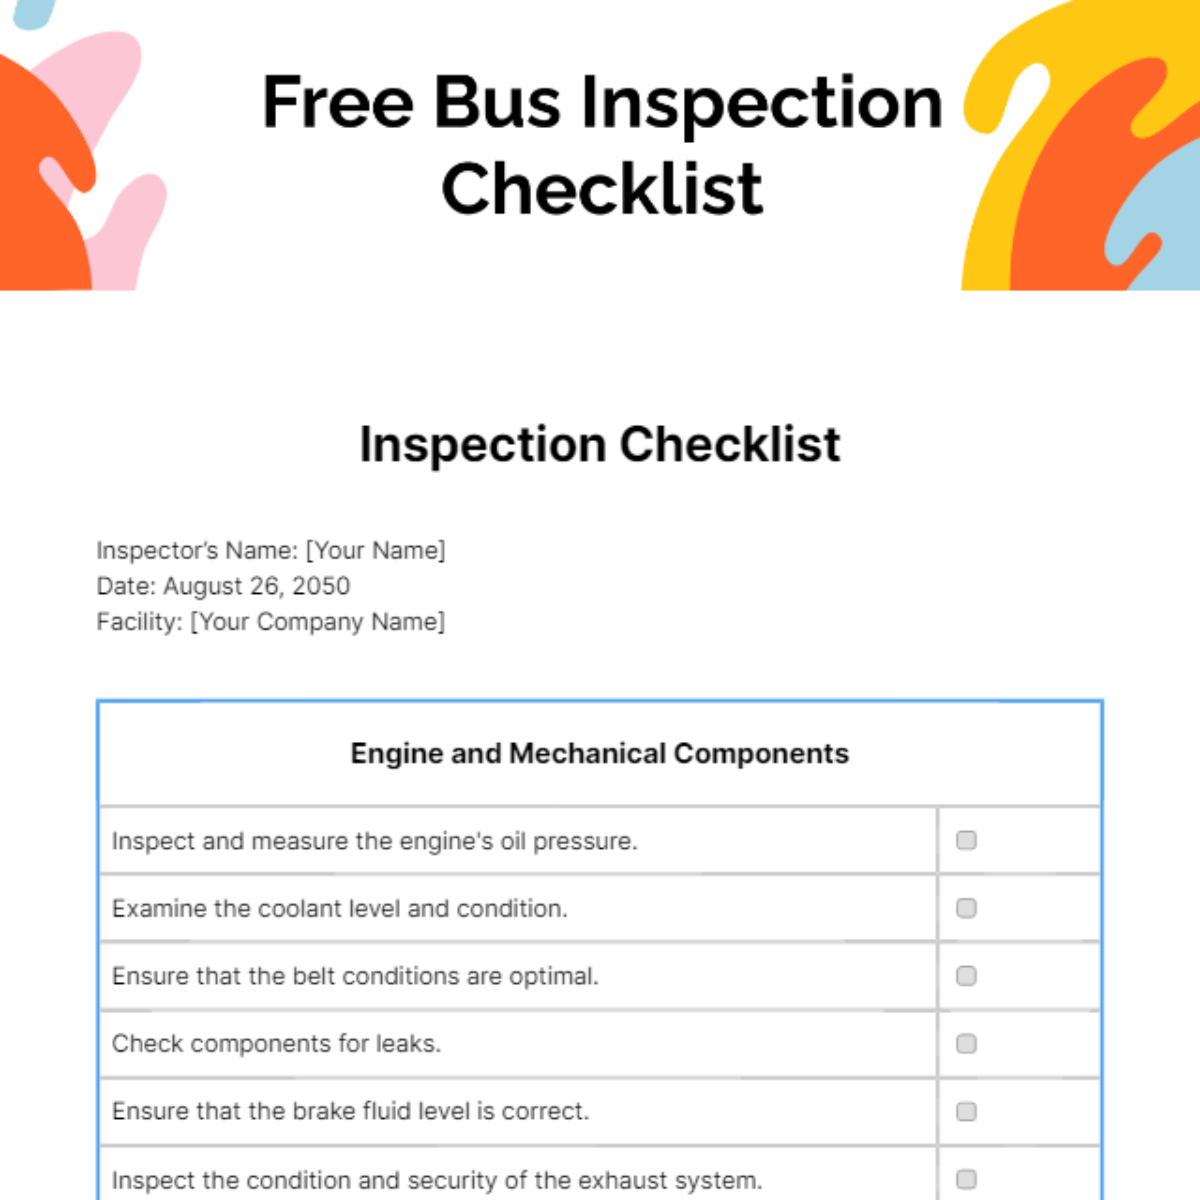 Free Bus Inspection Checklist Template